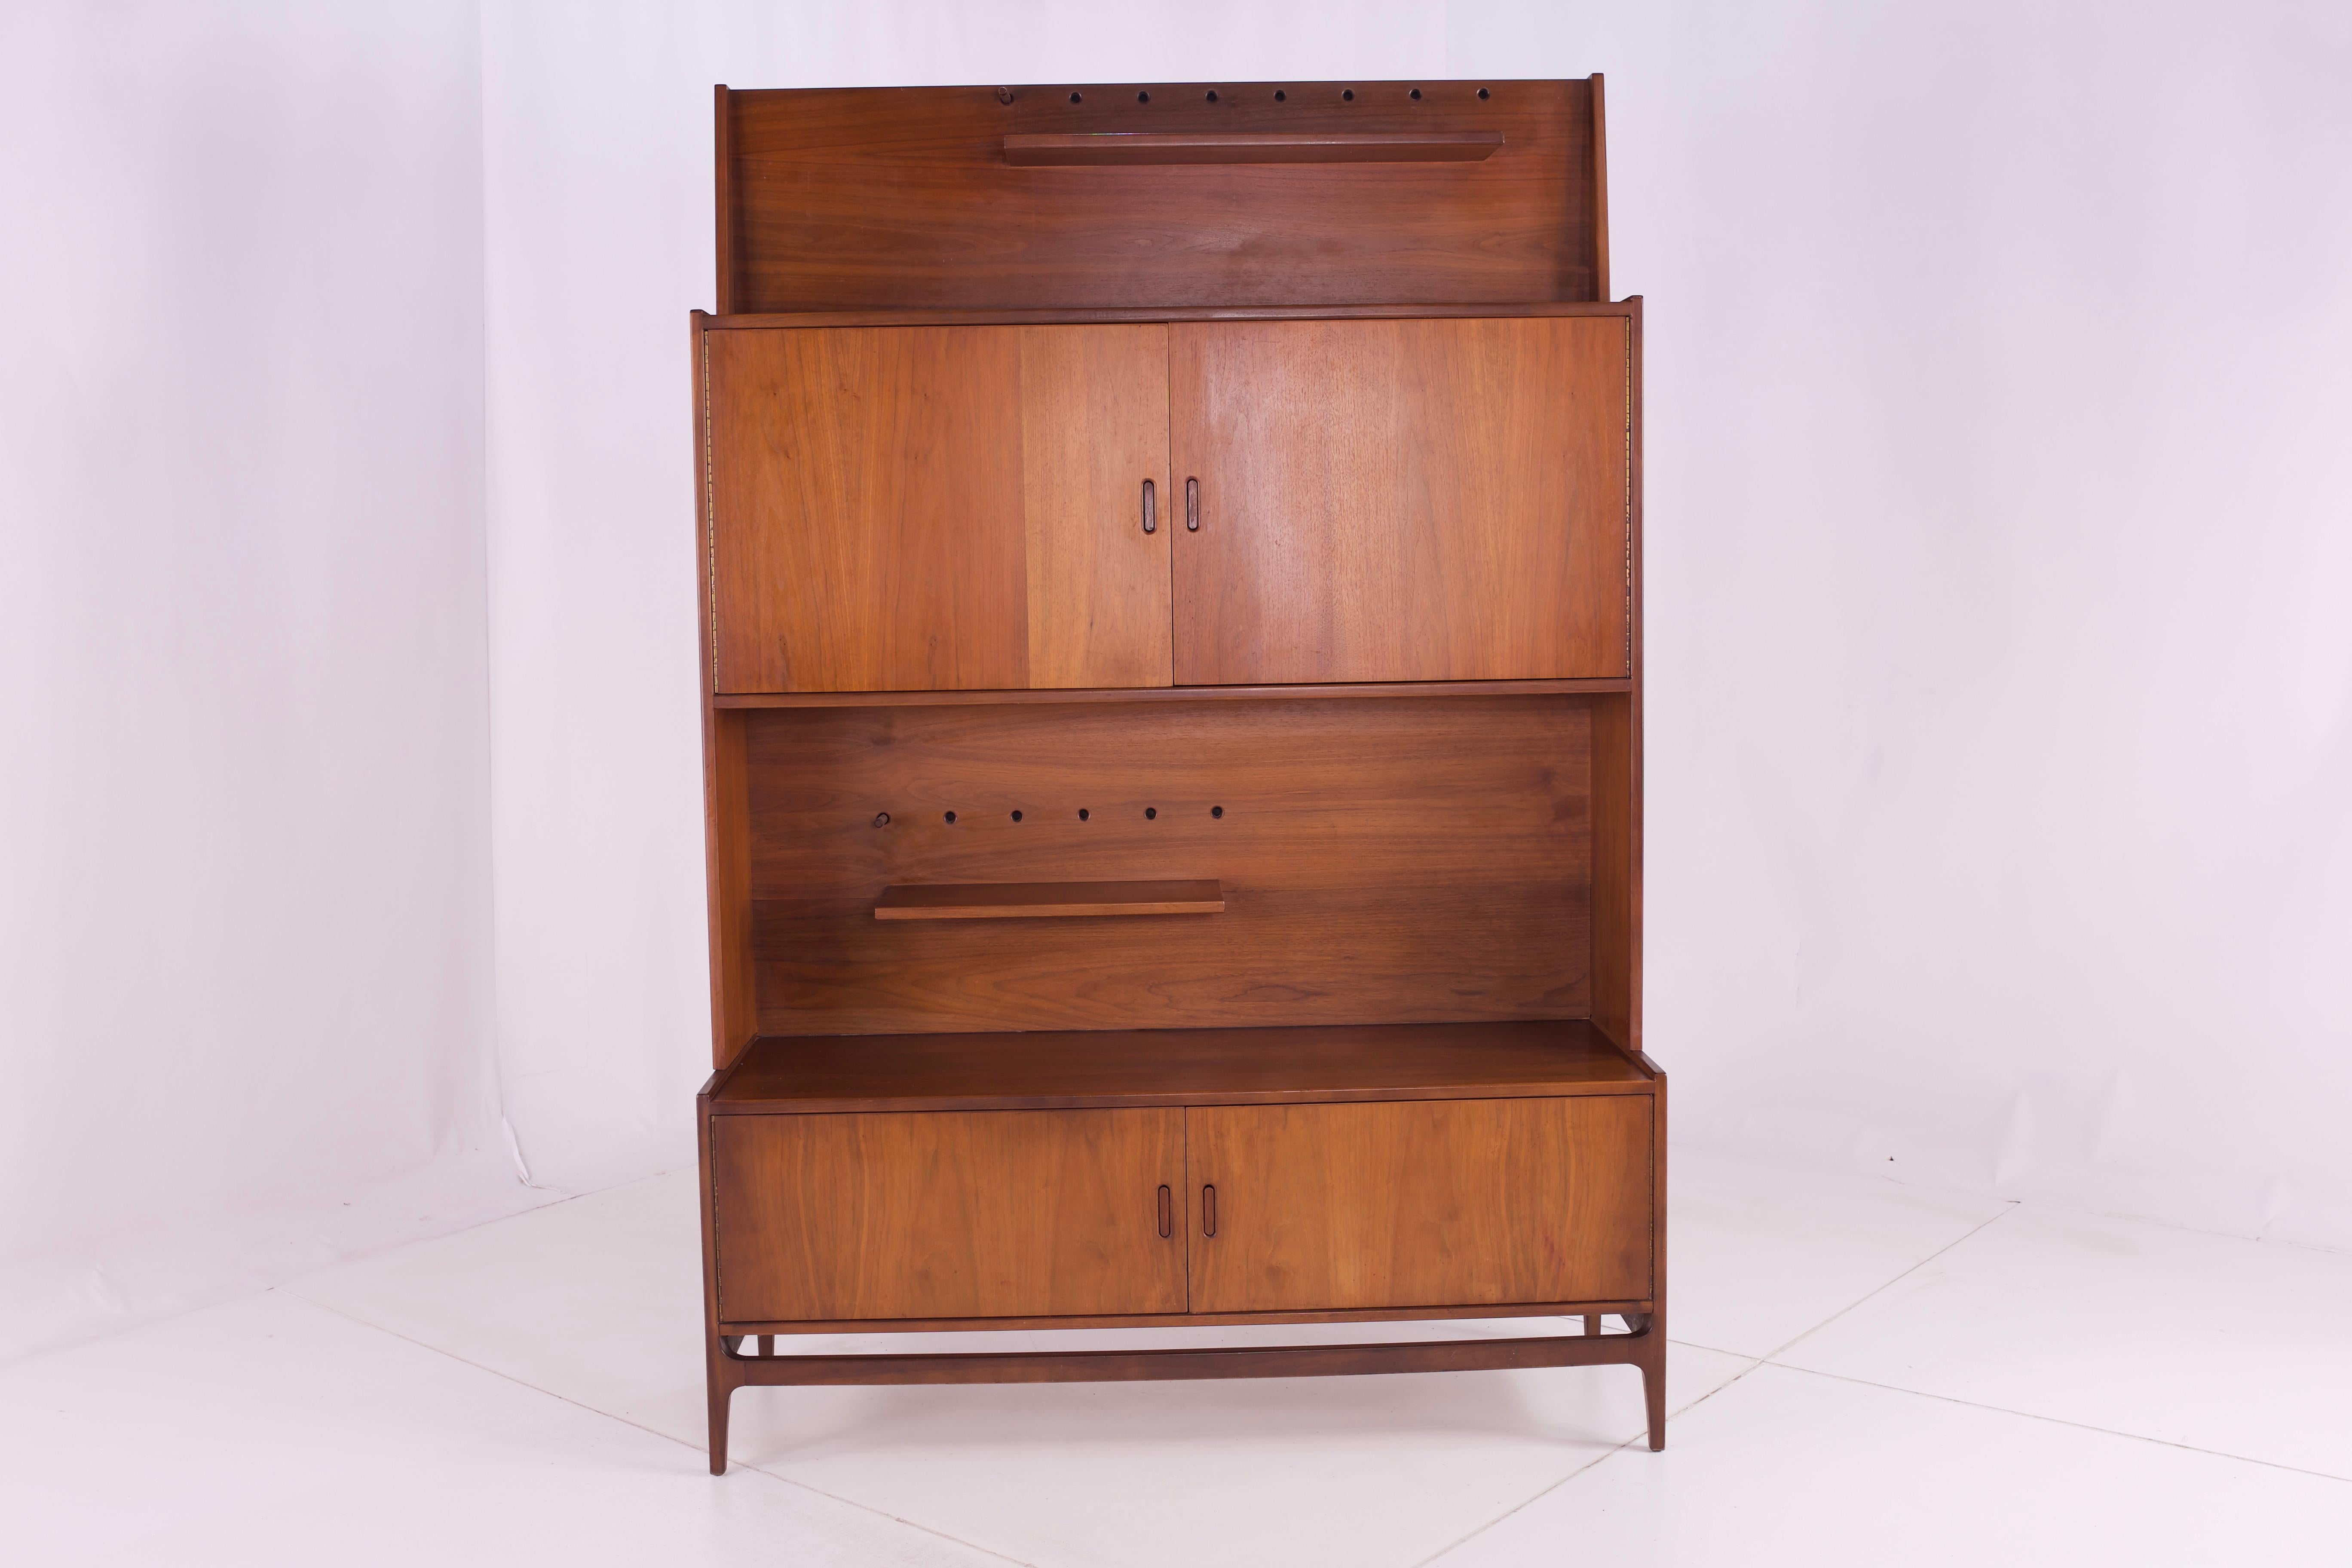 Richard Thompson for Glenn of California midcentury sideboard credenza buffet and Hutch display cabinet 
Measures: 51 wide x 18 deep x 77.25 high 
See below for 5 ways to save!
Free restoration: When you purchase a piece we carefully clean and